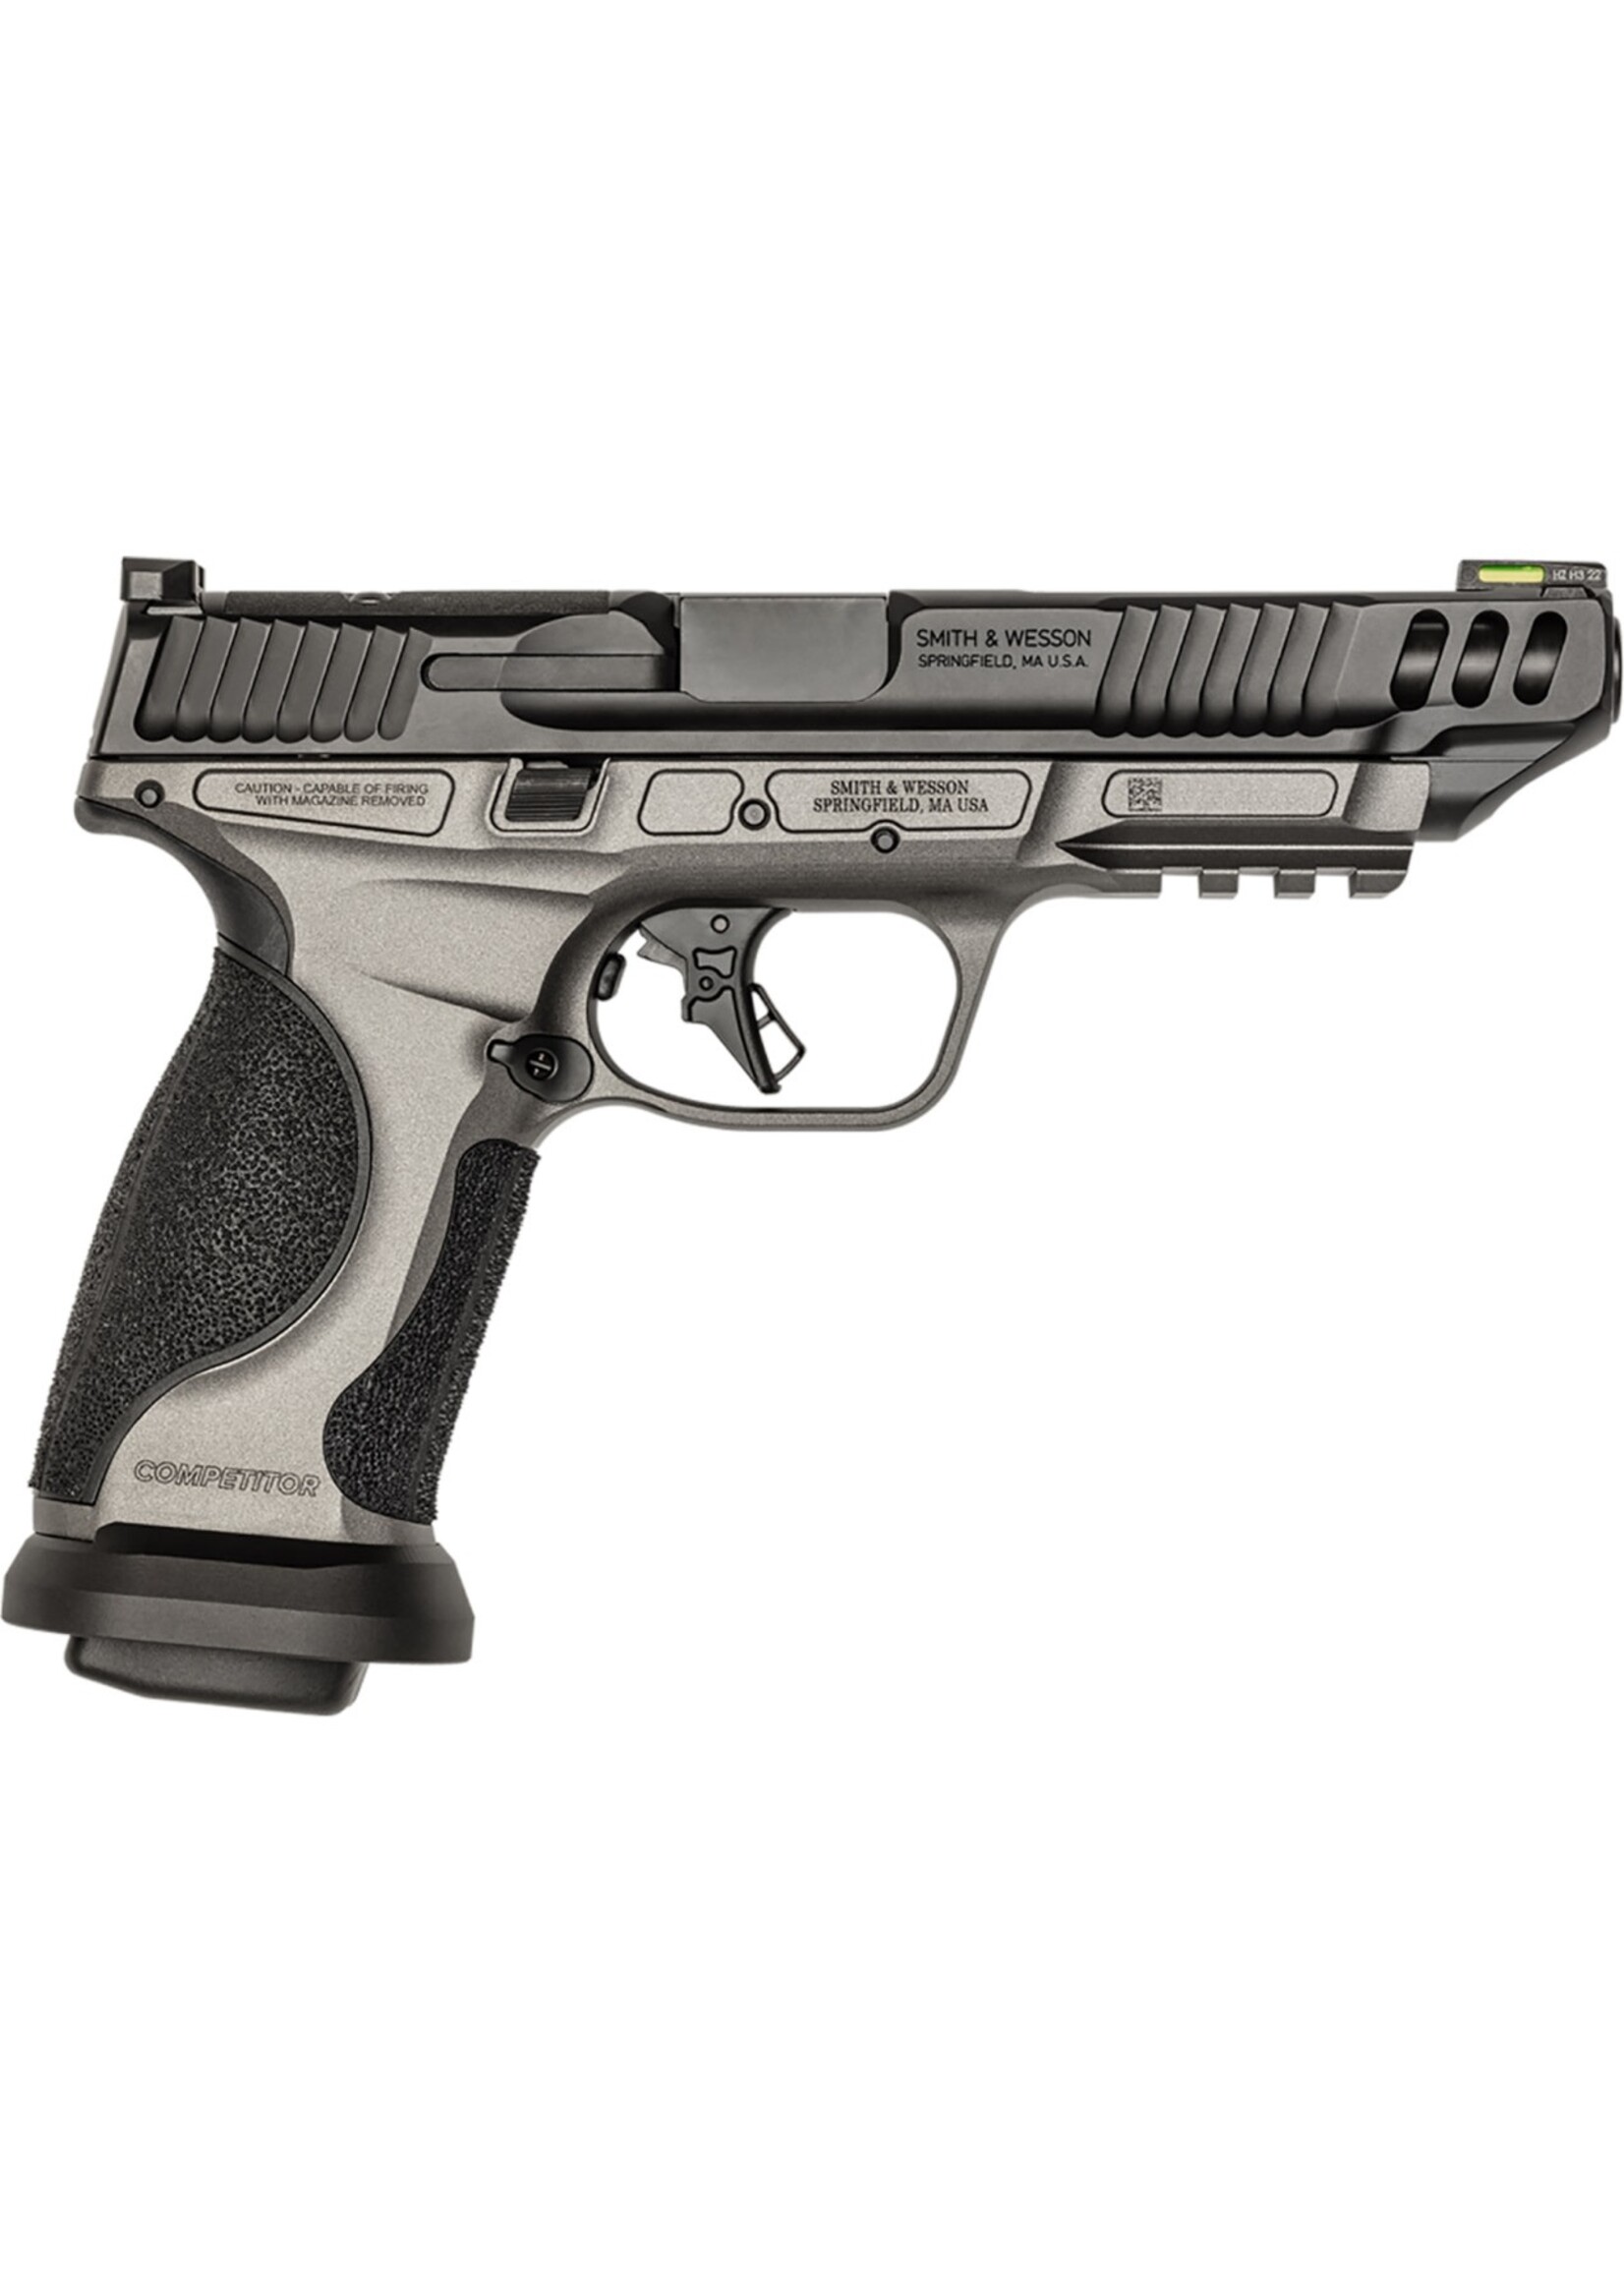 SMITH & WESSON SMITH & WESSON PERFORMANCE CENTER M&P9 M2.0 COMPETITOR 9MM 17RD 5"